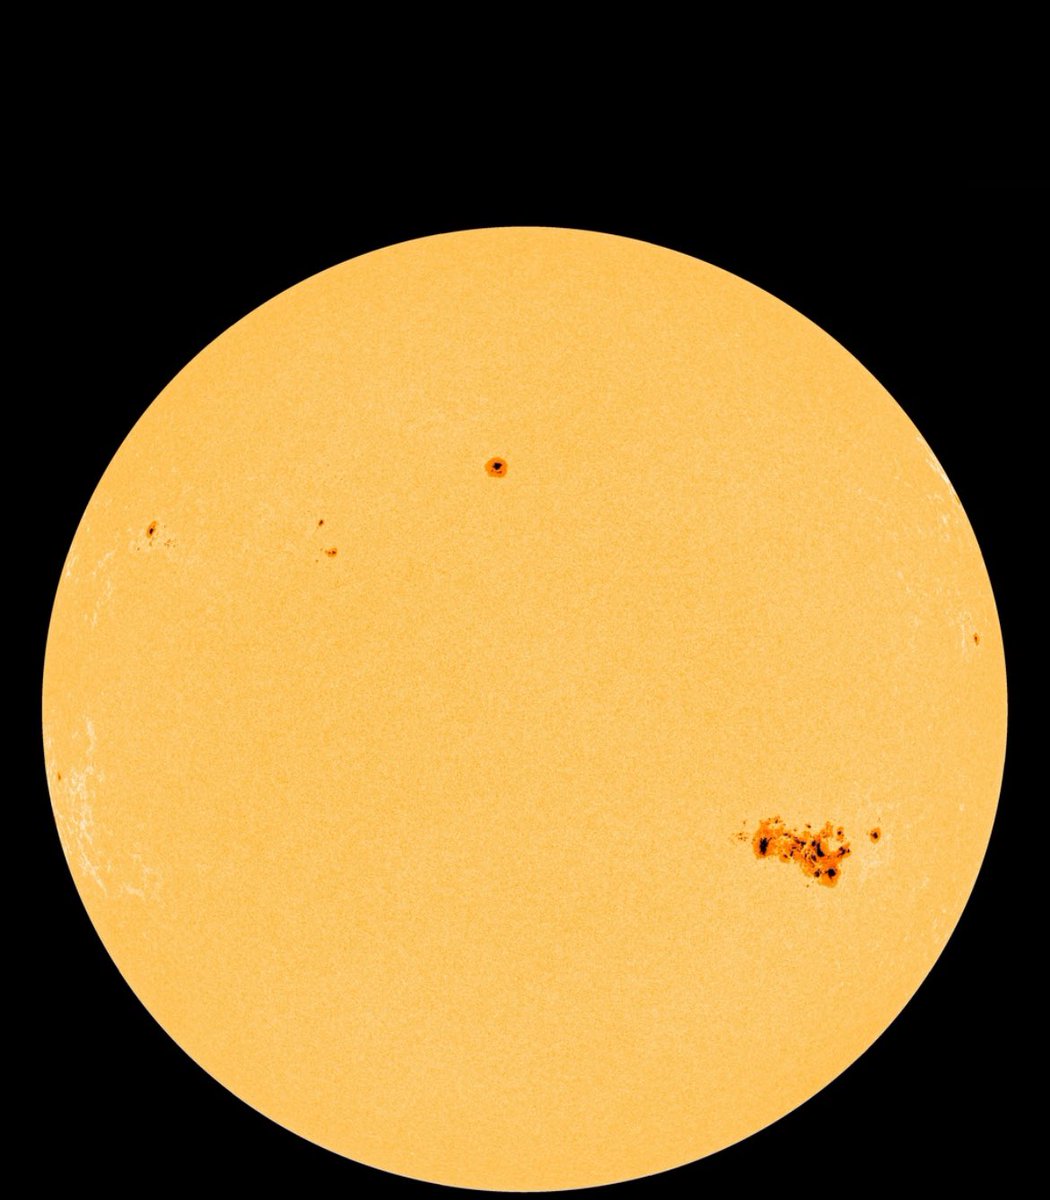 Thought I would summarise why there is so much excitement in the space weather community right now. There’s a monstrous sunspot group on the Sun that’s massive enough to be visible to the naked eye (please use eclipse glasses) 🌞 👓 (1/n)